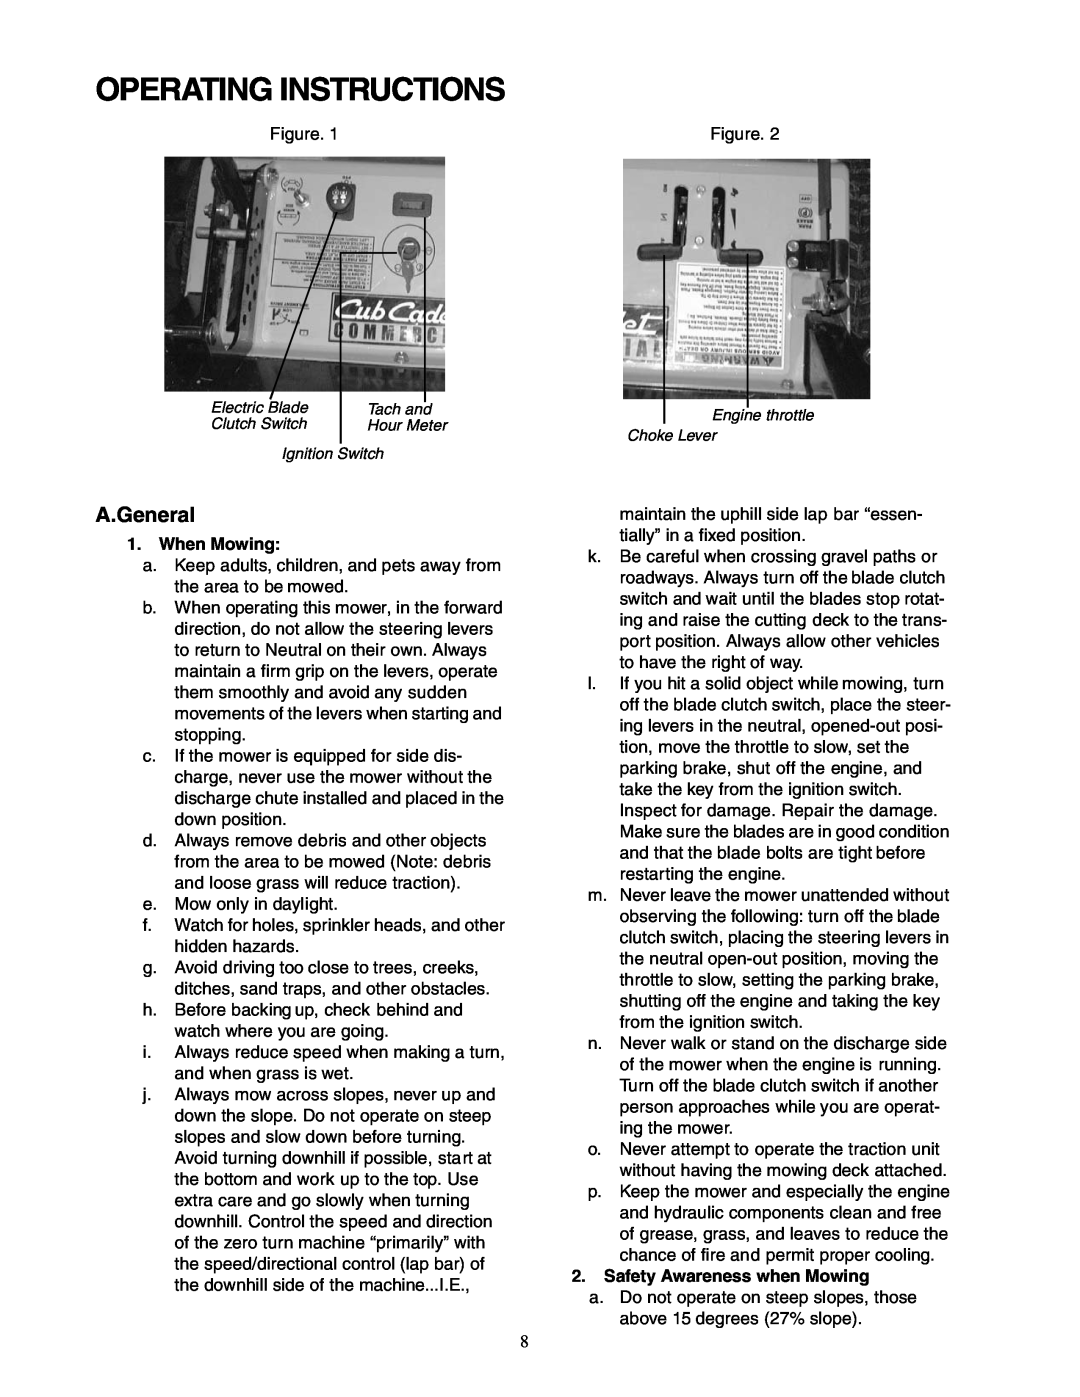 Cub Cadet Z - Wing 48 service manual Operating Instructions, When Mowing, Safety Awareness when Mowing 